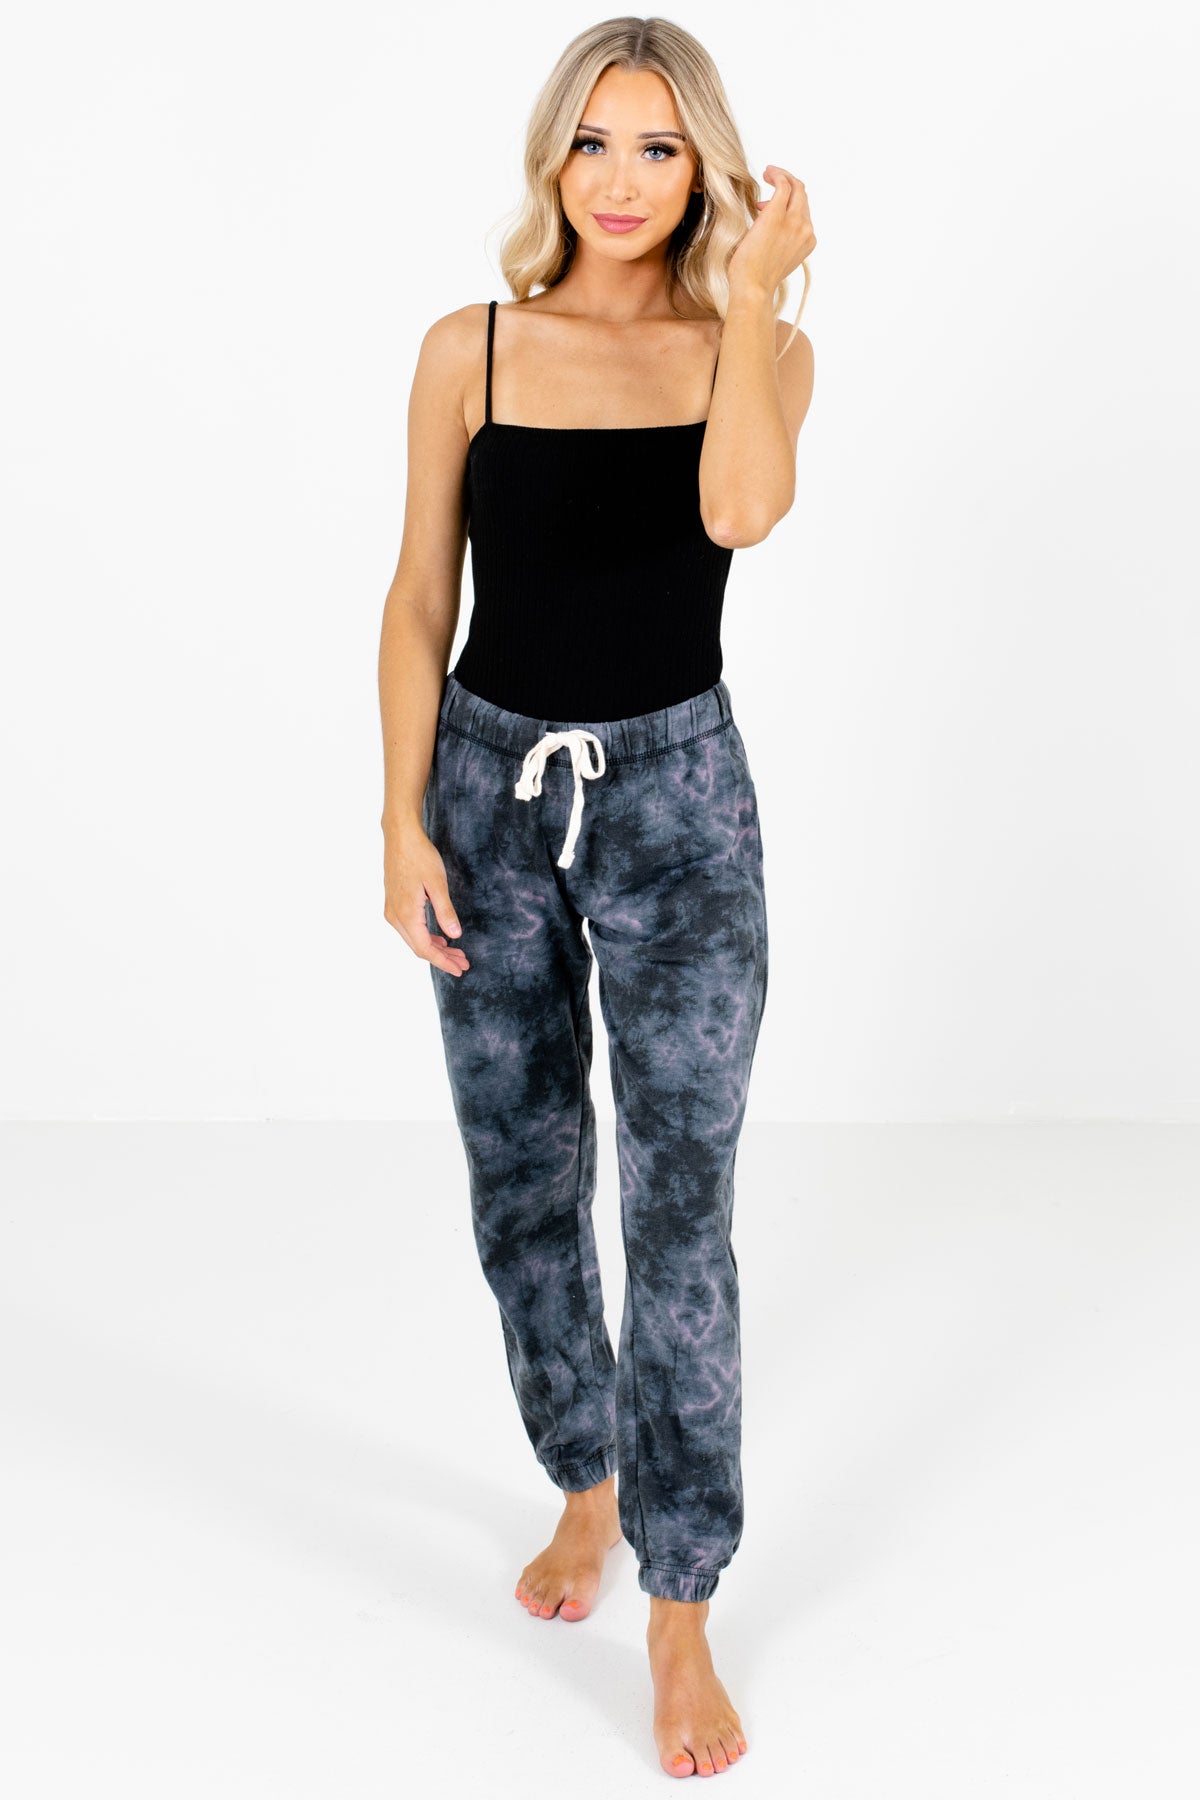 Women's Charcoal Gray Lightweight High-Quality Boutique Joggers